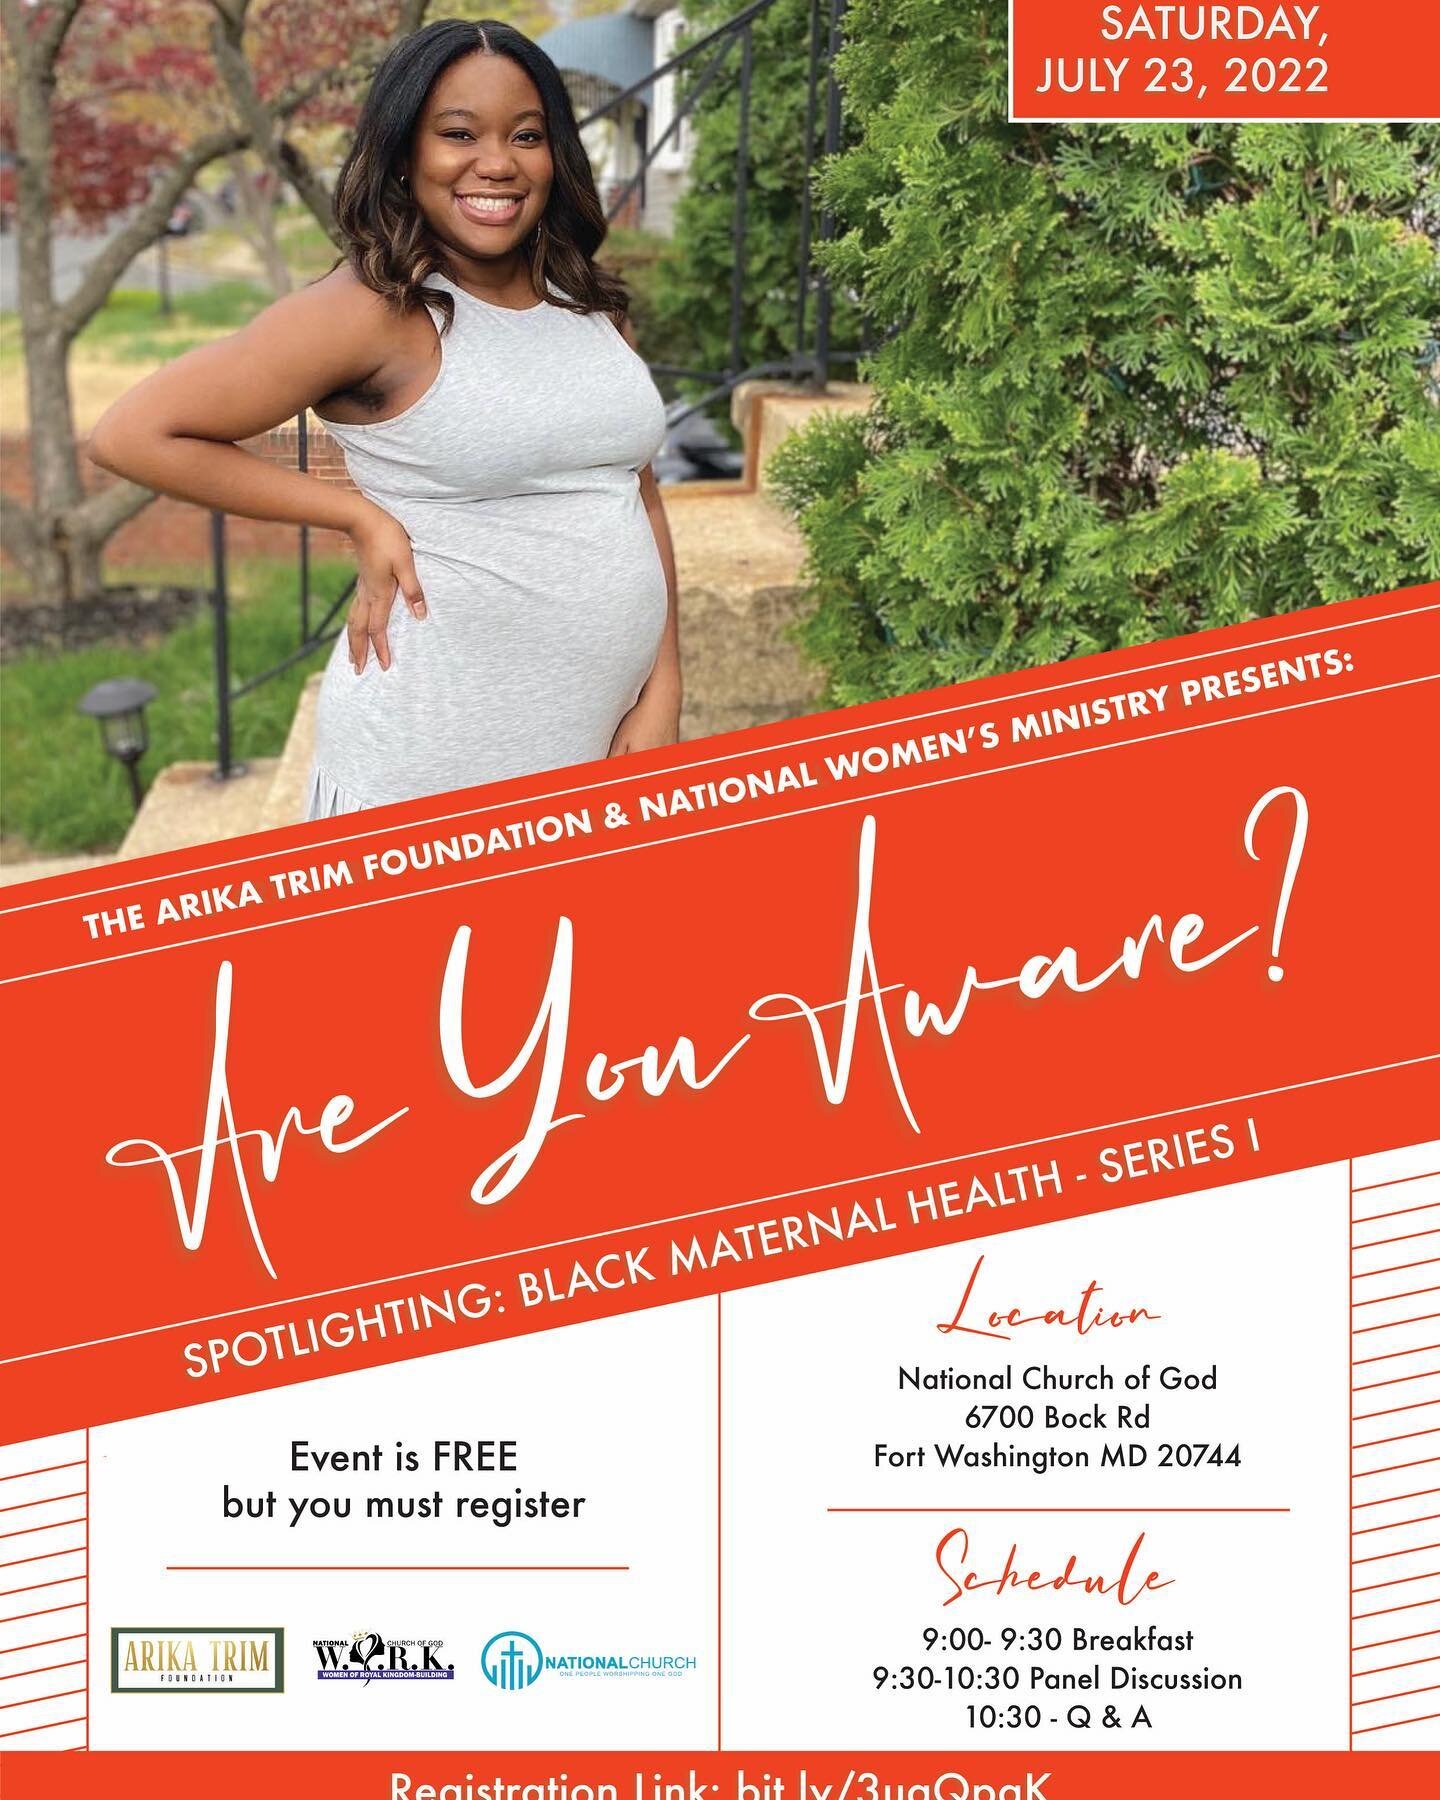 We are so excited to host our first event on the 23rd of this month! We will be talking about Black Maternal Health during and what the goals of our foundation are. One of our main initiatives is to bring awareness to the disparities that exist in ma